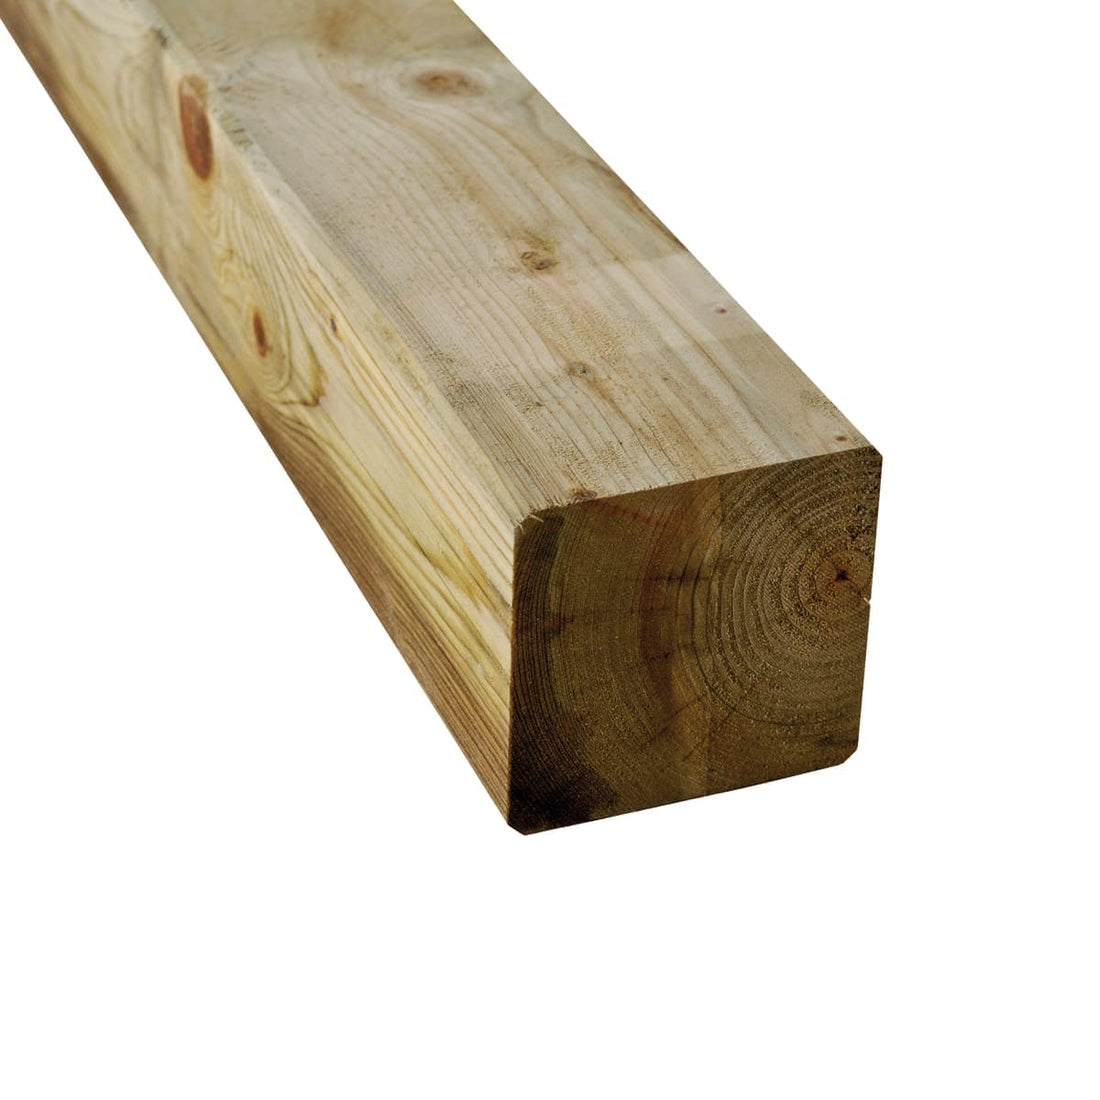 7 X 7 X H 240 CM SQUARE POLE OF AUTOCLAVE-TREATED PINE WOOD - best price from Maltashopper.com BR500008896